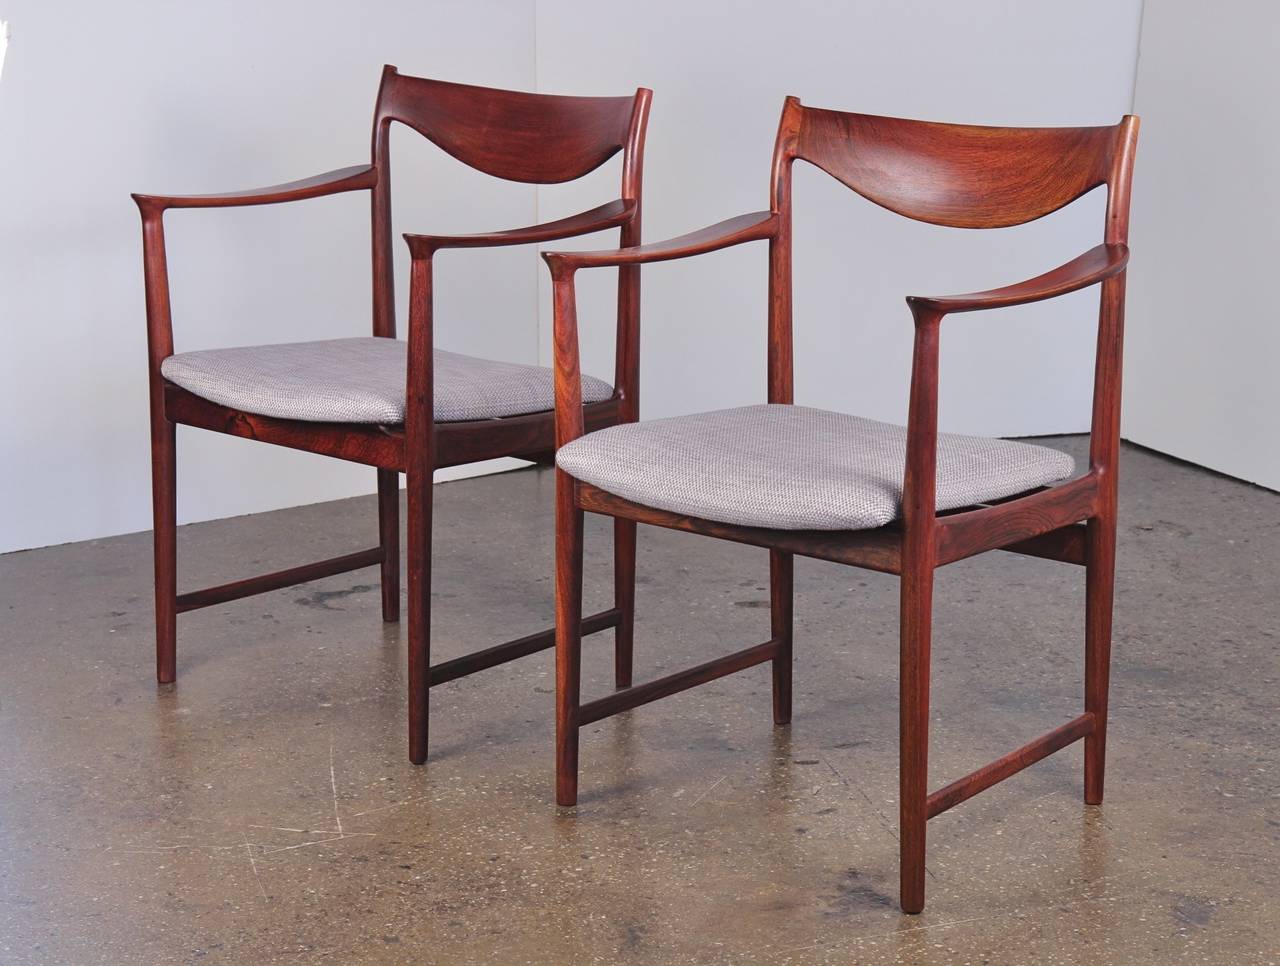 Stunning pair of chairs in rich Danish rosewood. We love the curvaceous, sculptural frames. Newly upholstered in a neutral Holly Hunt fabric. Use at the dining table or as occasional chairs. Made in Denmark. 1960s.

22